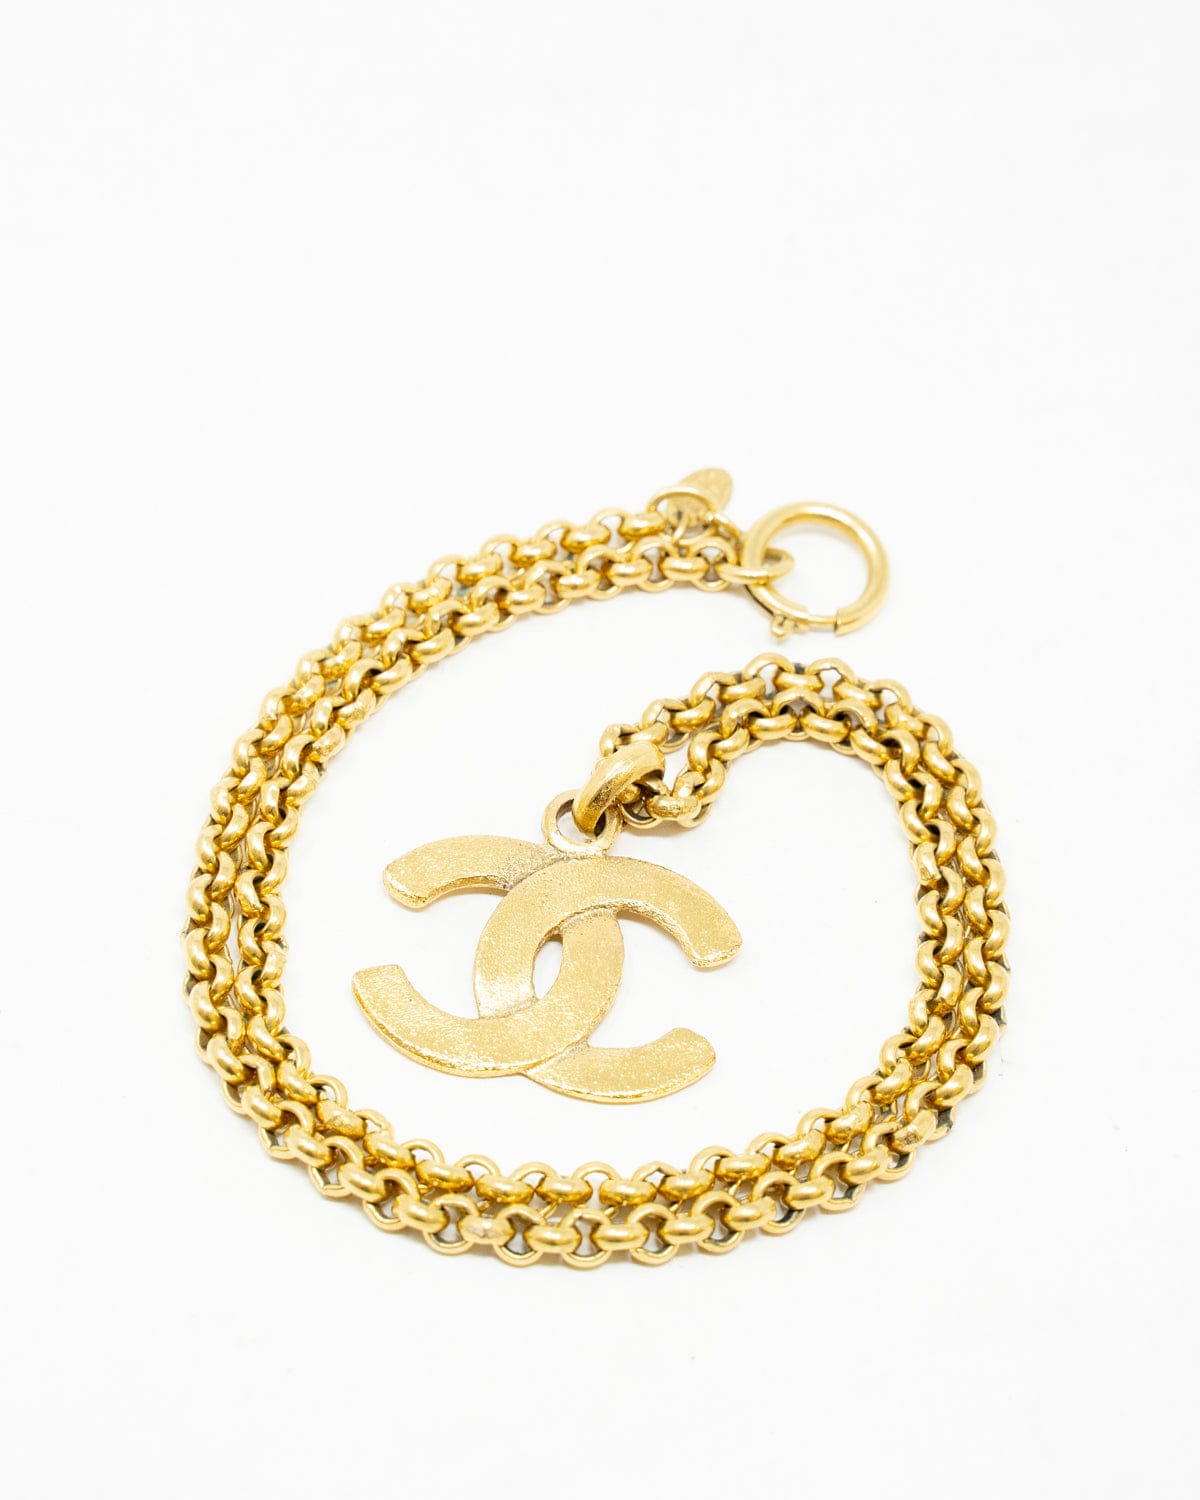 Chanel Chanel CC logo chain necklace ASL2750